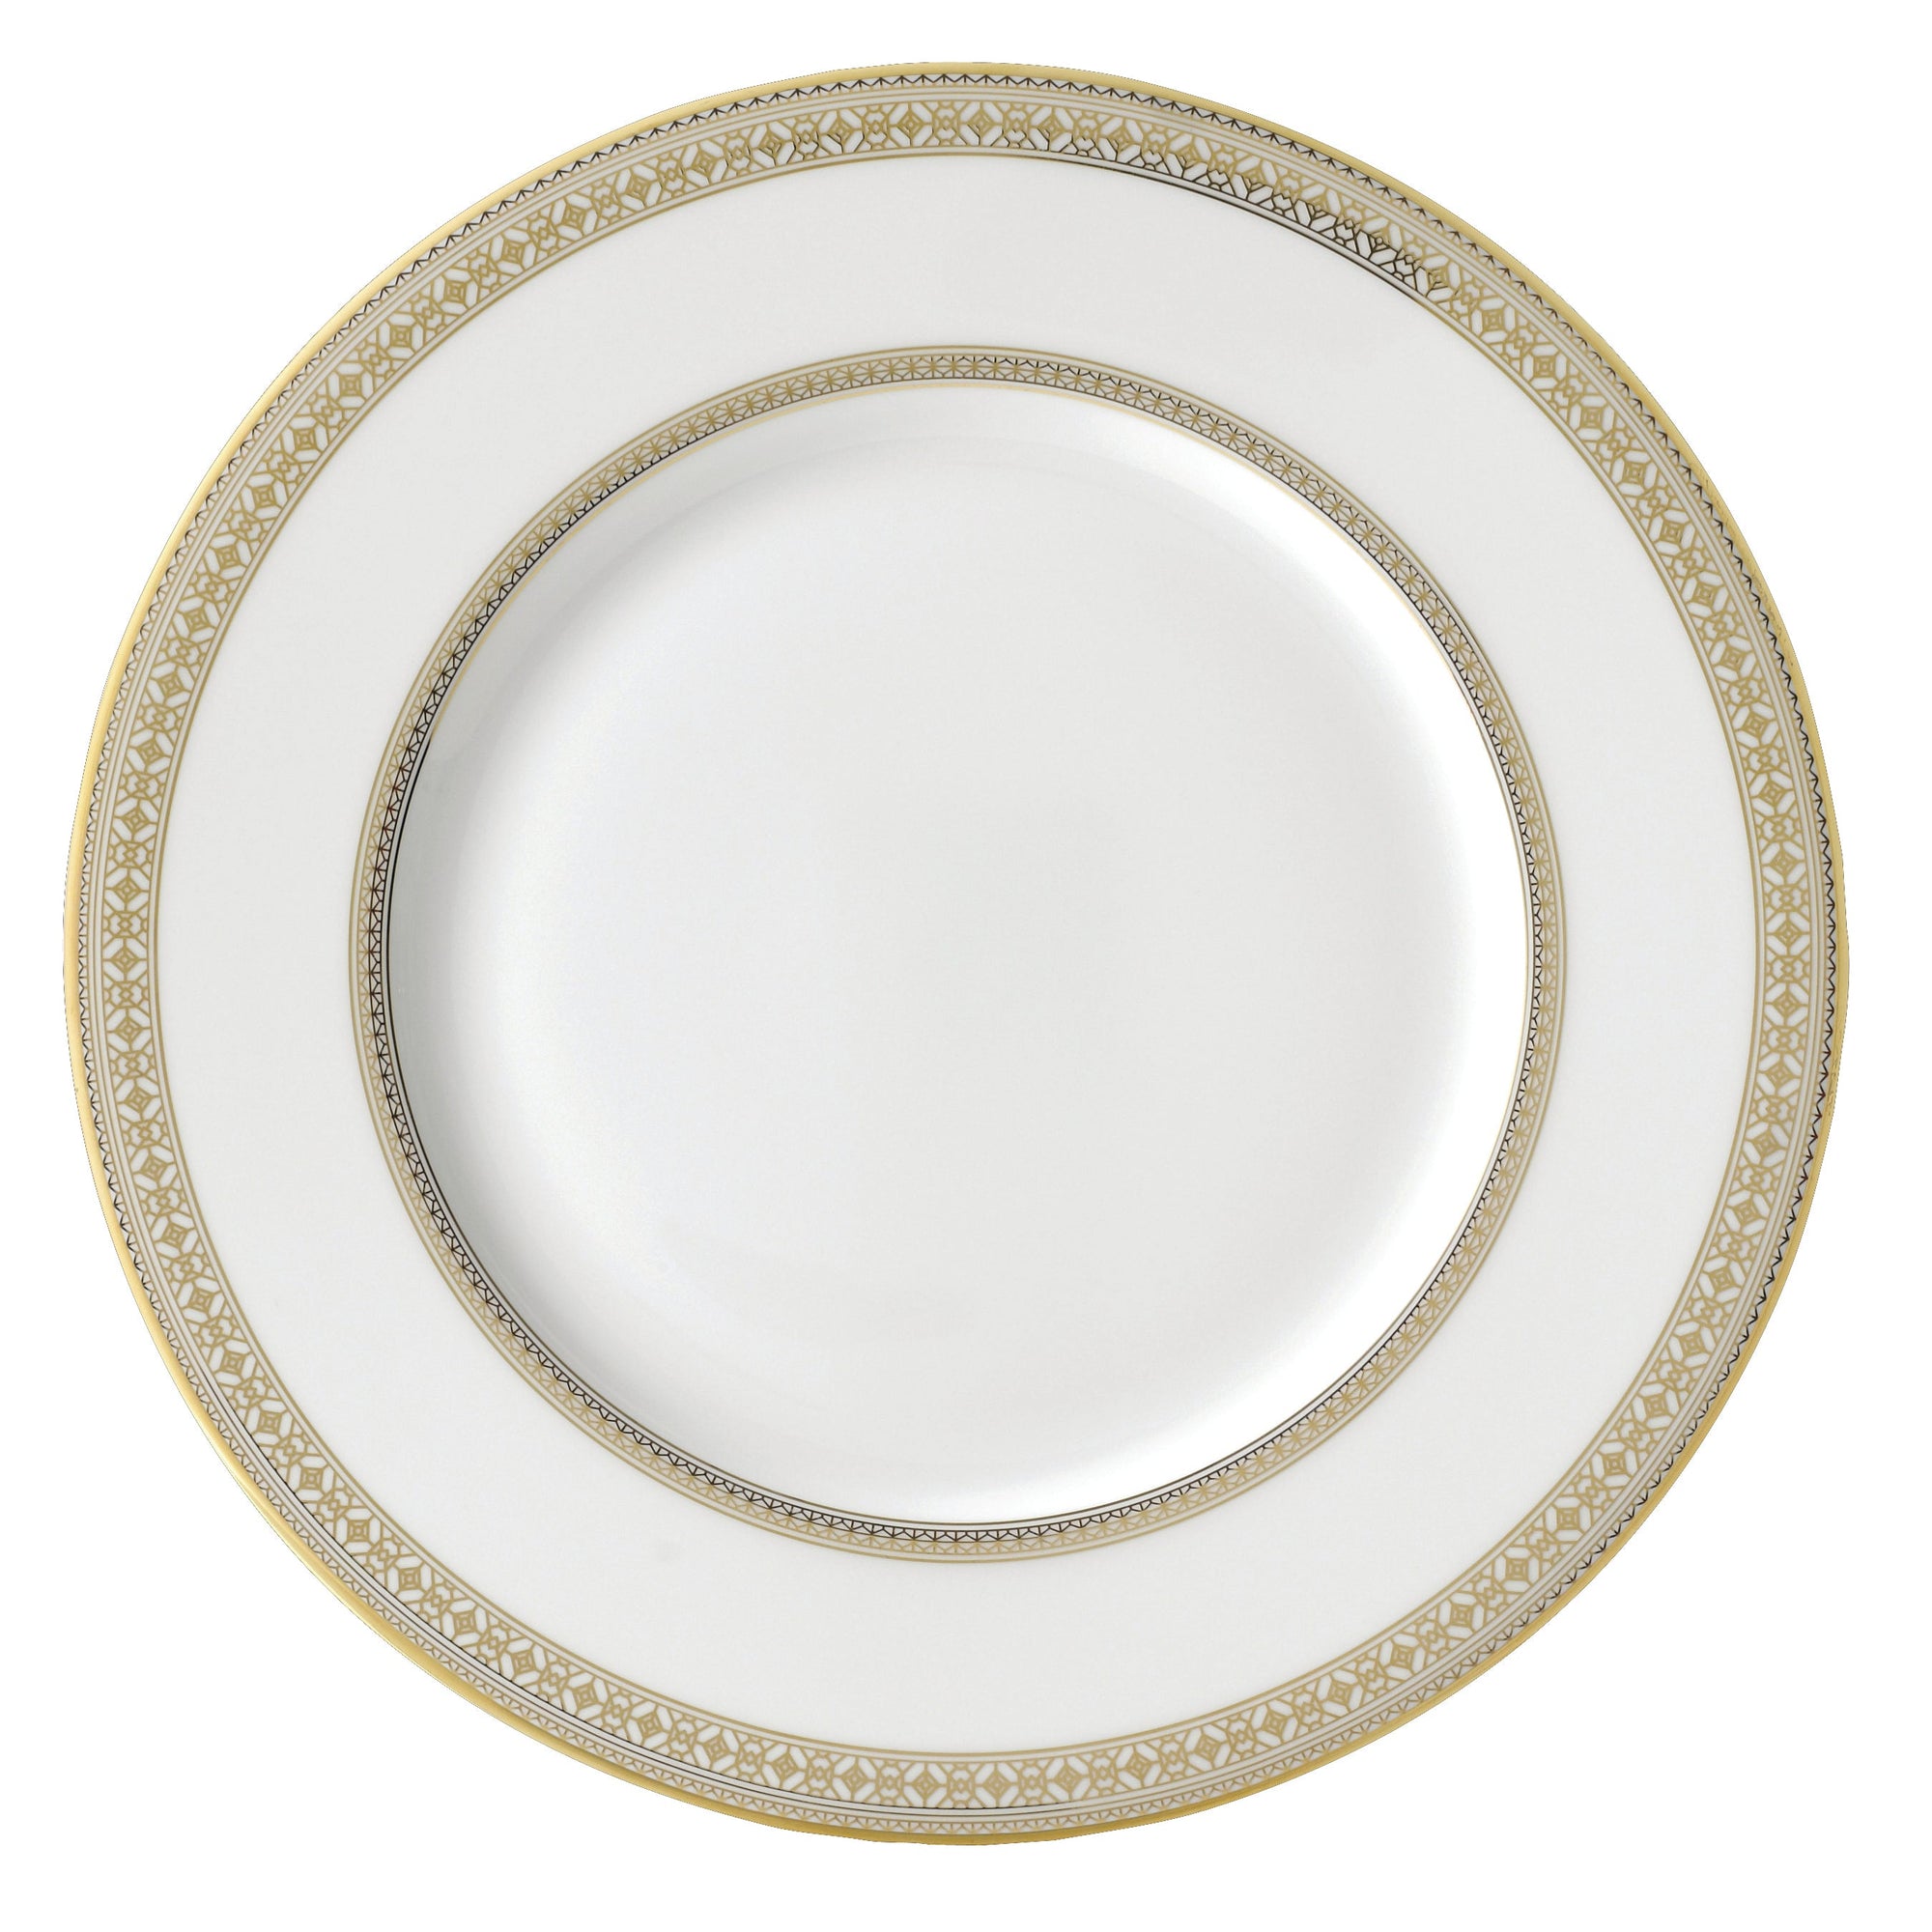 Prouna Golden Leaves Charger Plate White Background Photo